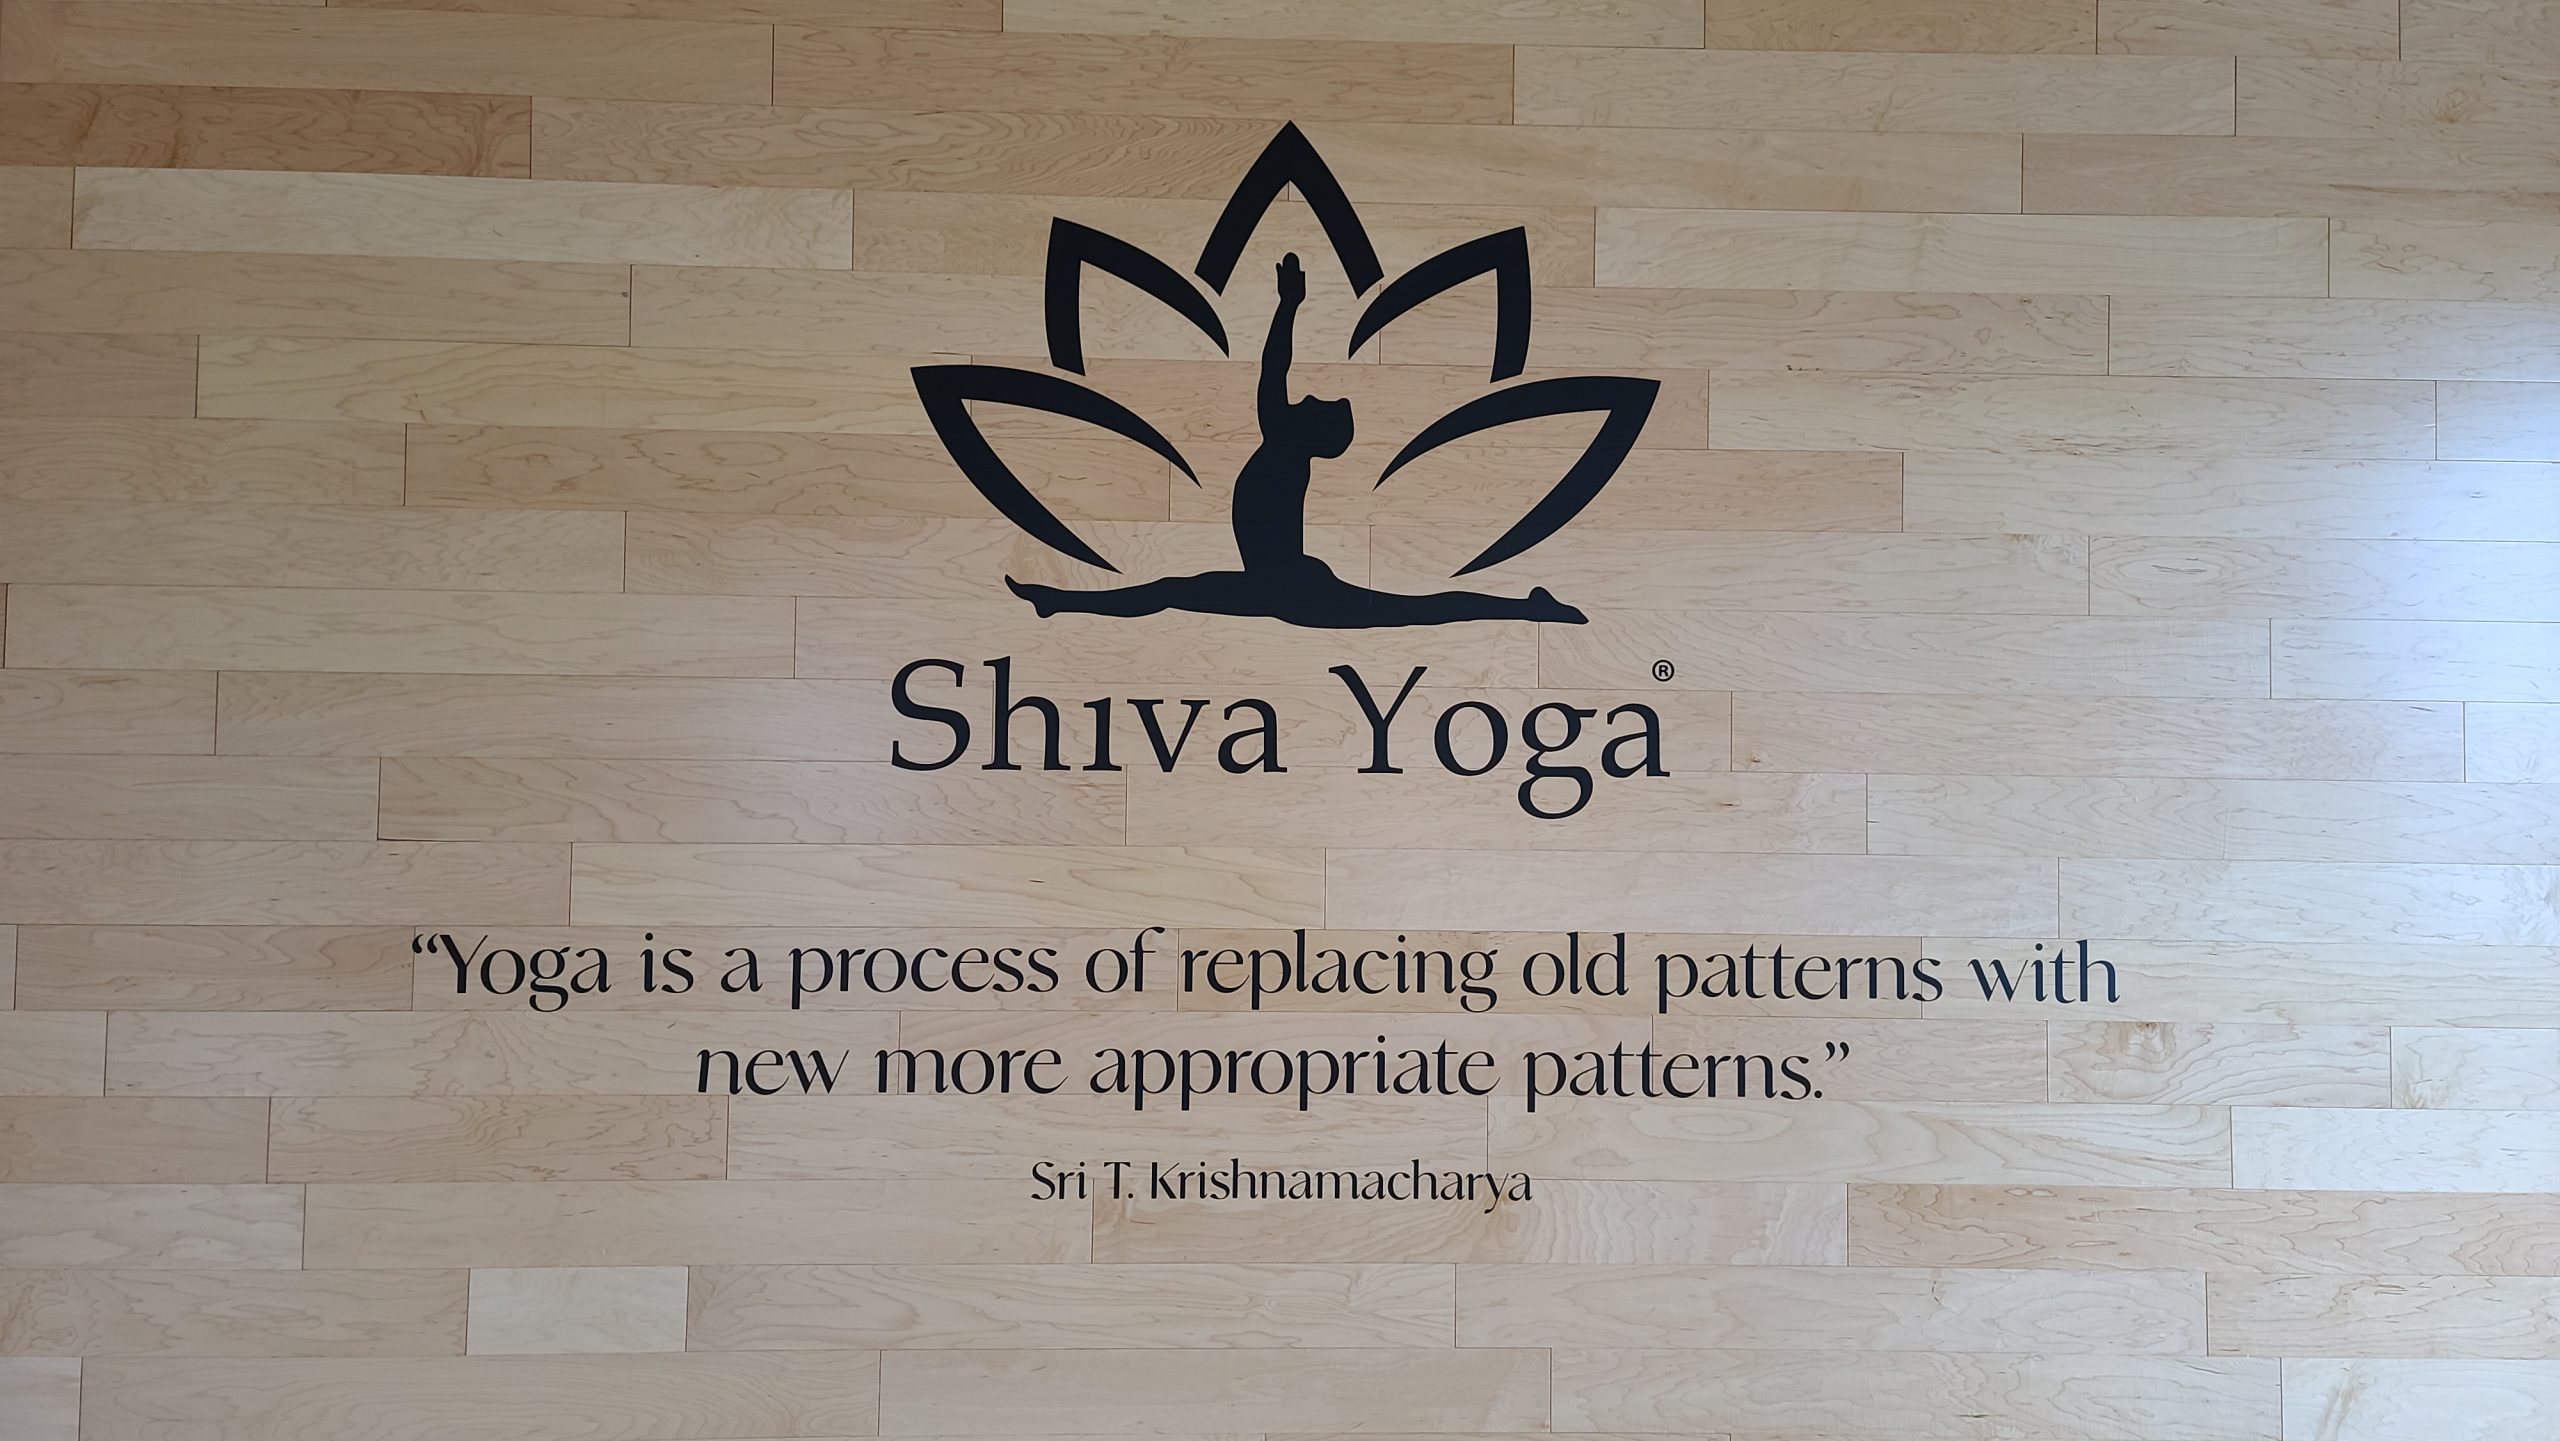 With these wall graphics, members and visitors alike will know that tranquility and a good workout await them in Shiva Yoga's West Hollywood branch.